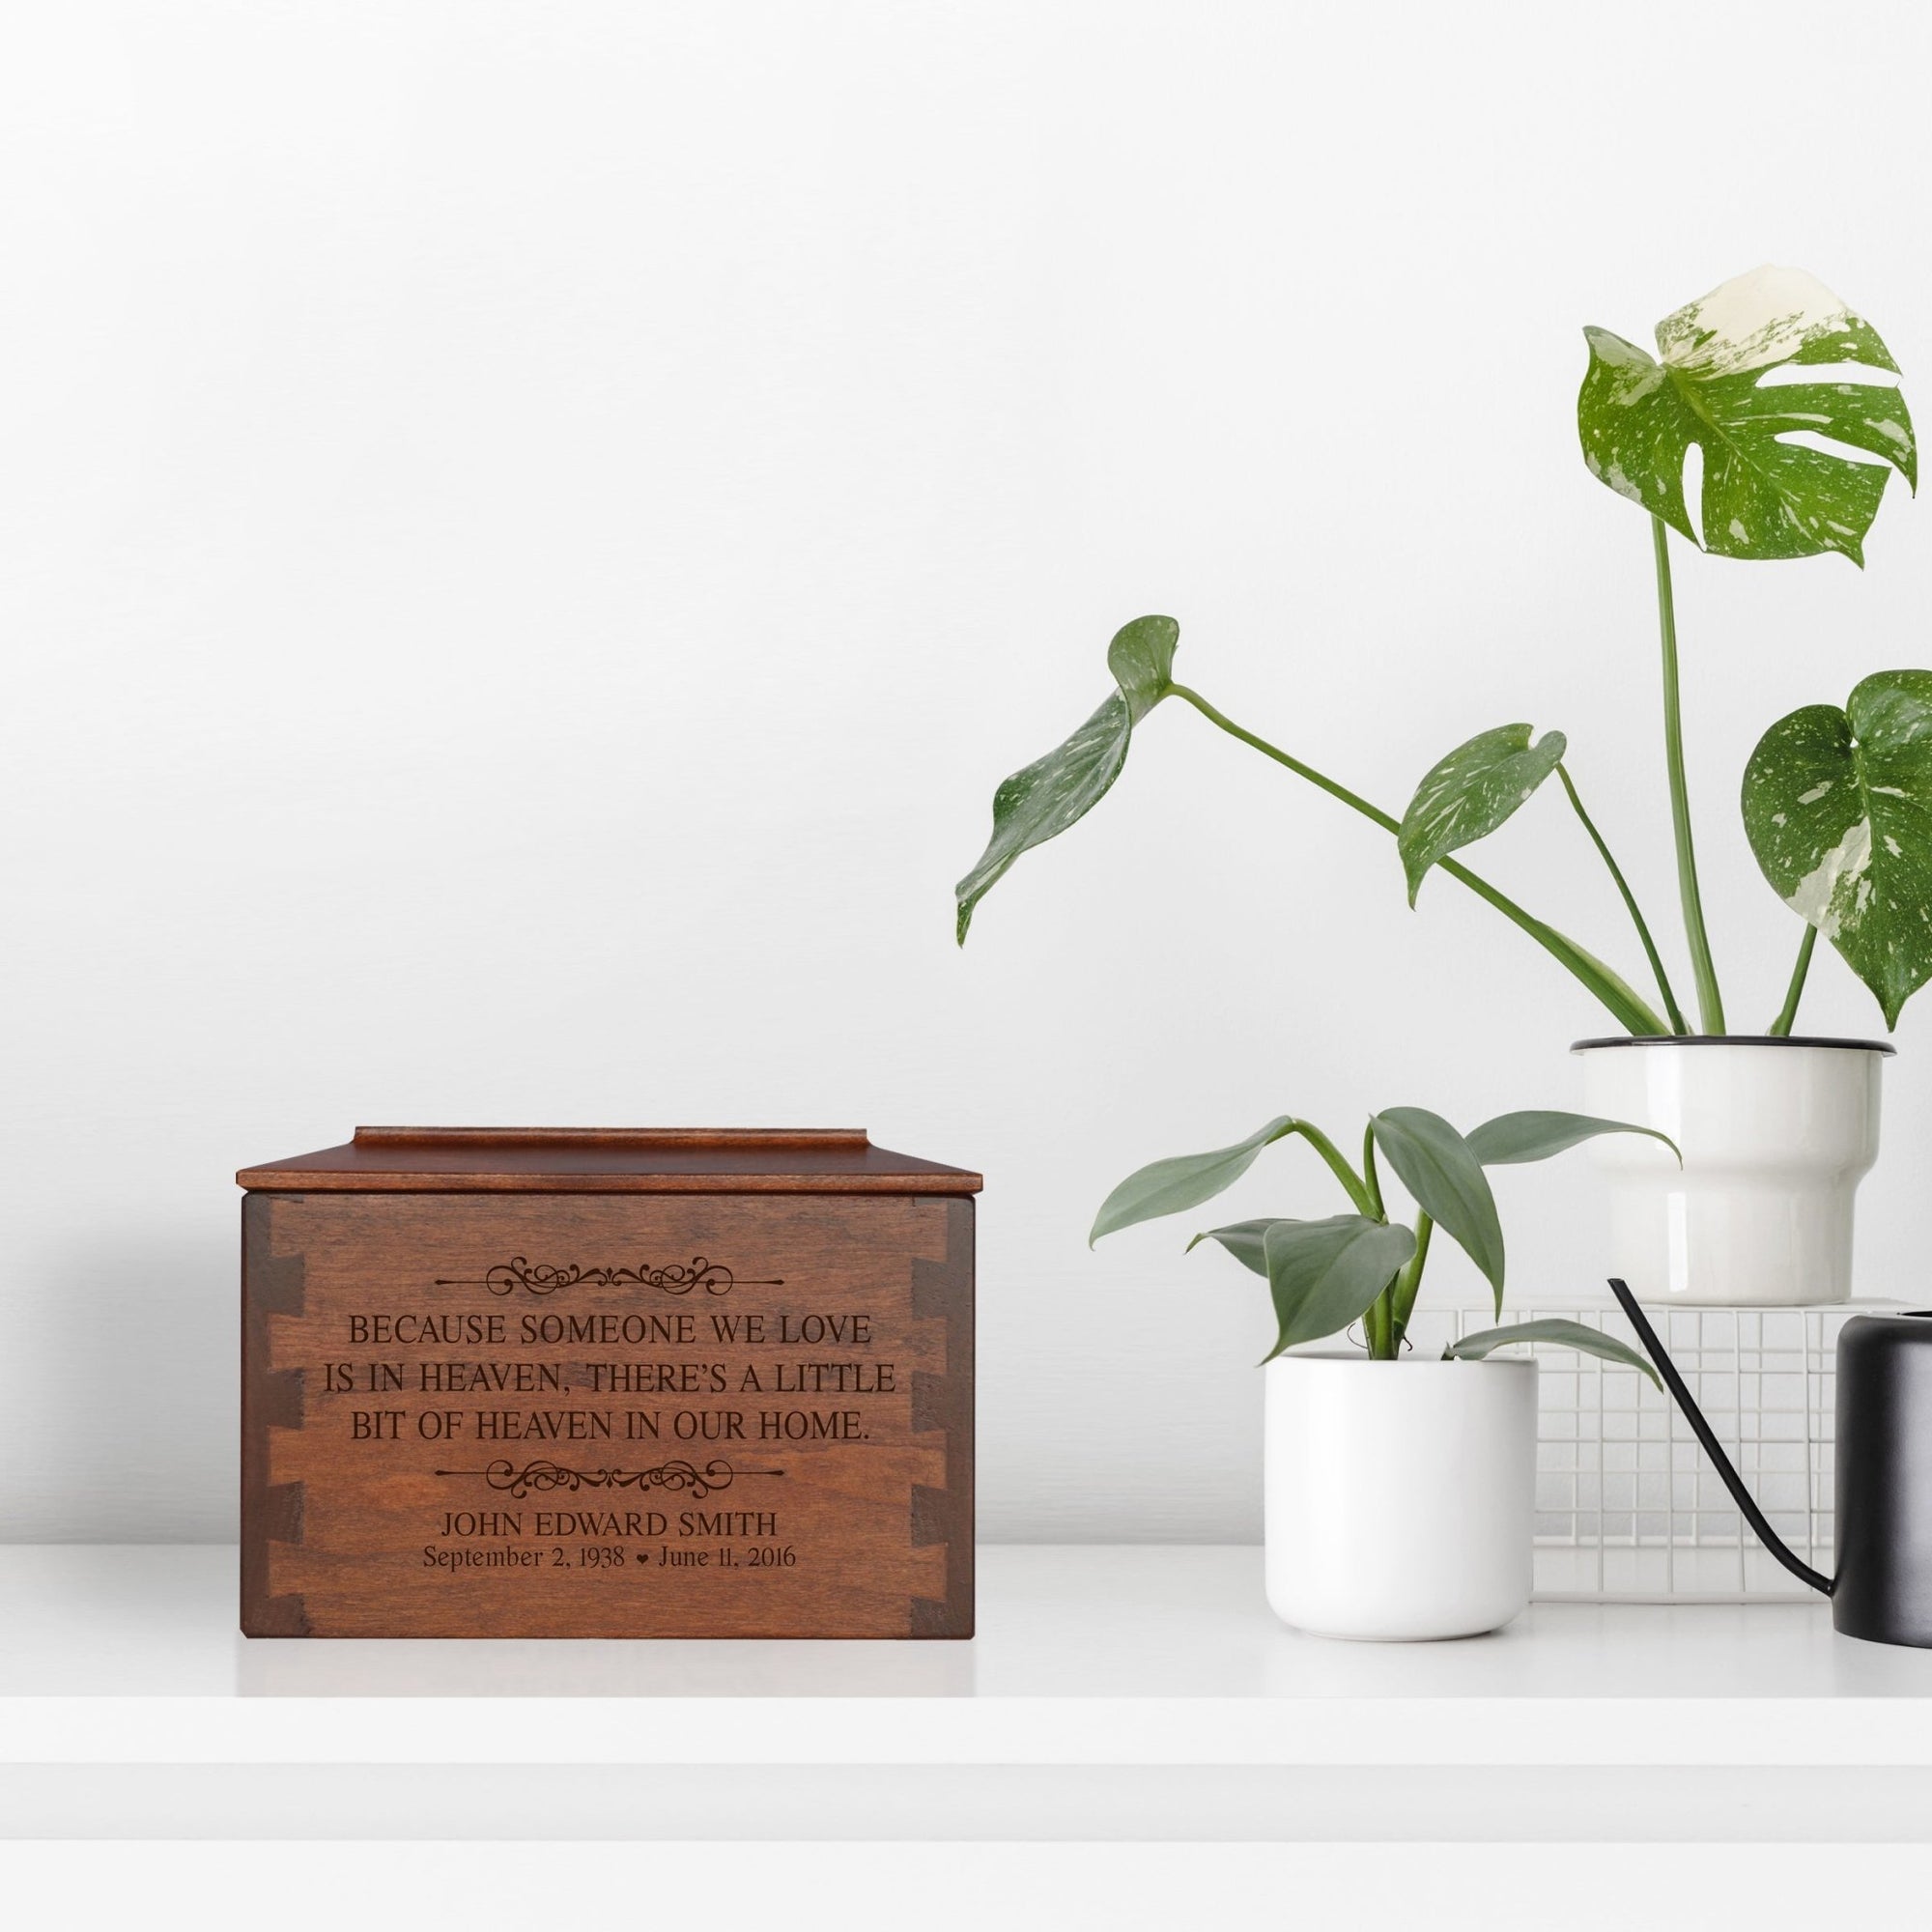 Personalized Memorial Dovetail Cremation Urn For Human Ashes